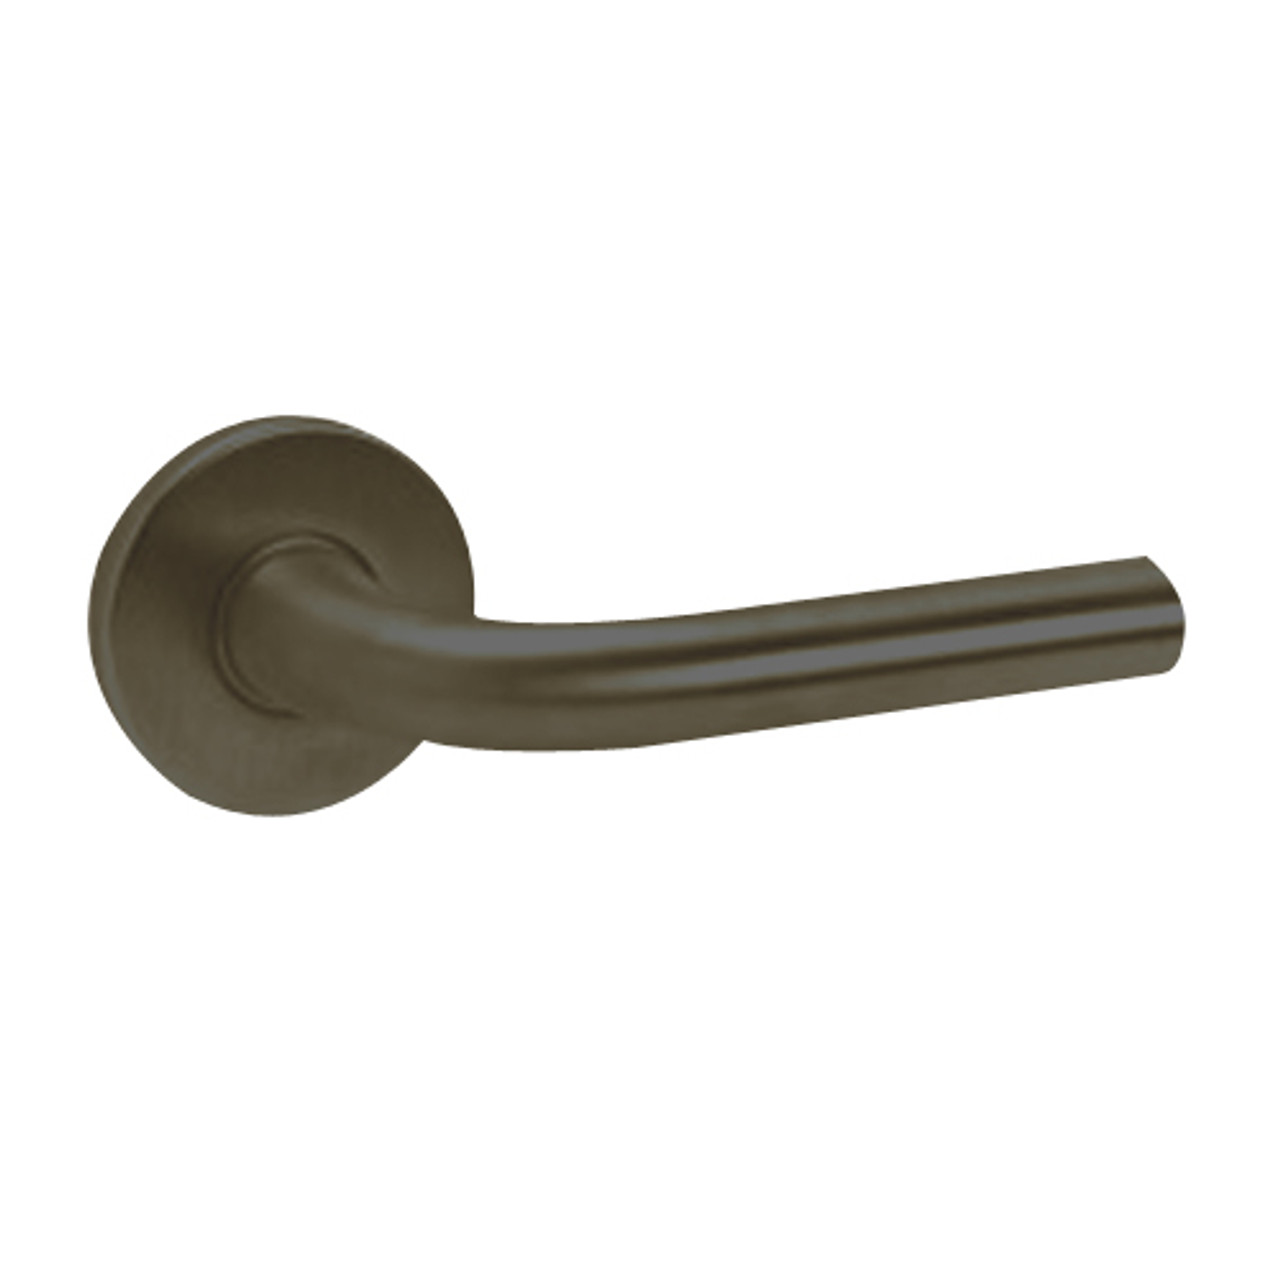 ML2032-RWB-613-CL6 Corbin Russwin ML2000 Series IC 6-Pin Less Core Mortise Institution Locksets with Regis Lever in Oil Rubbed Bronze